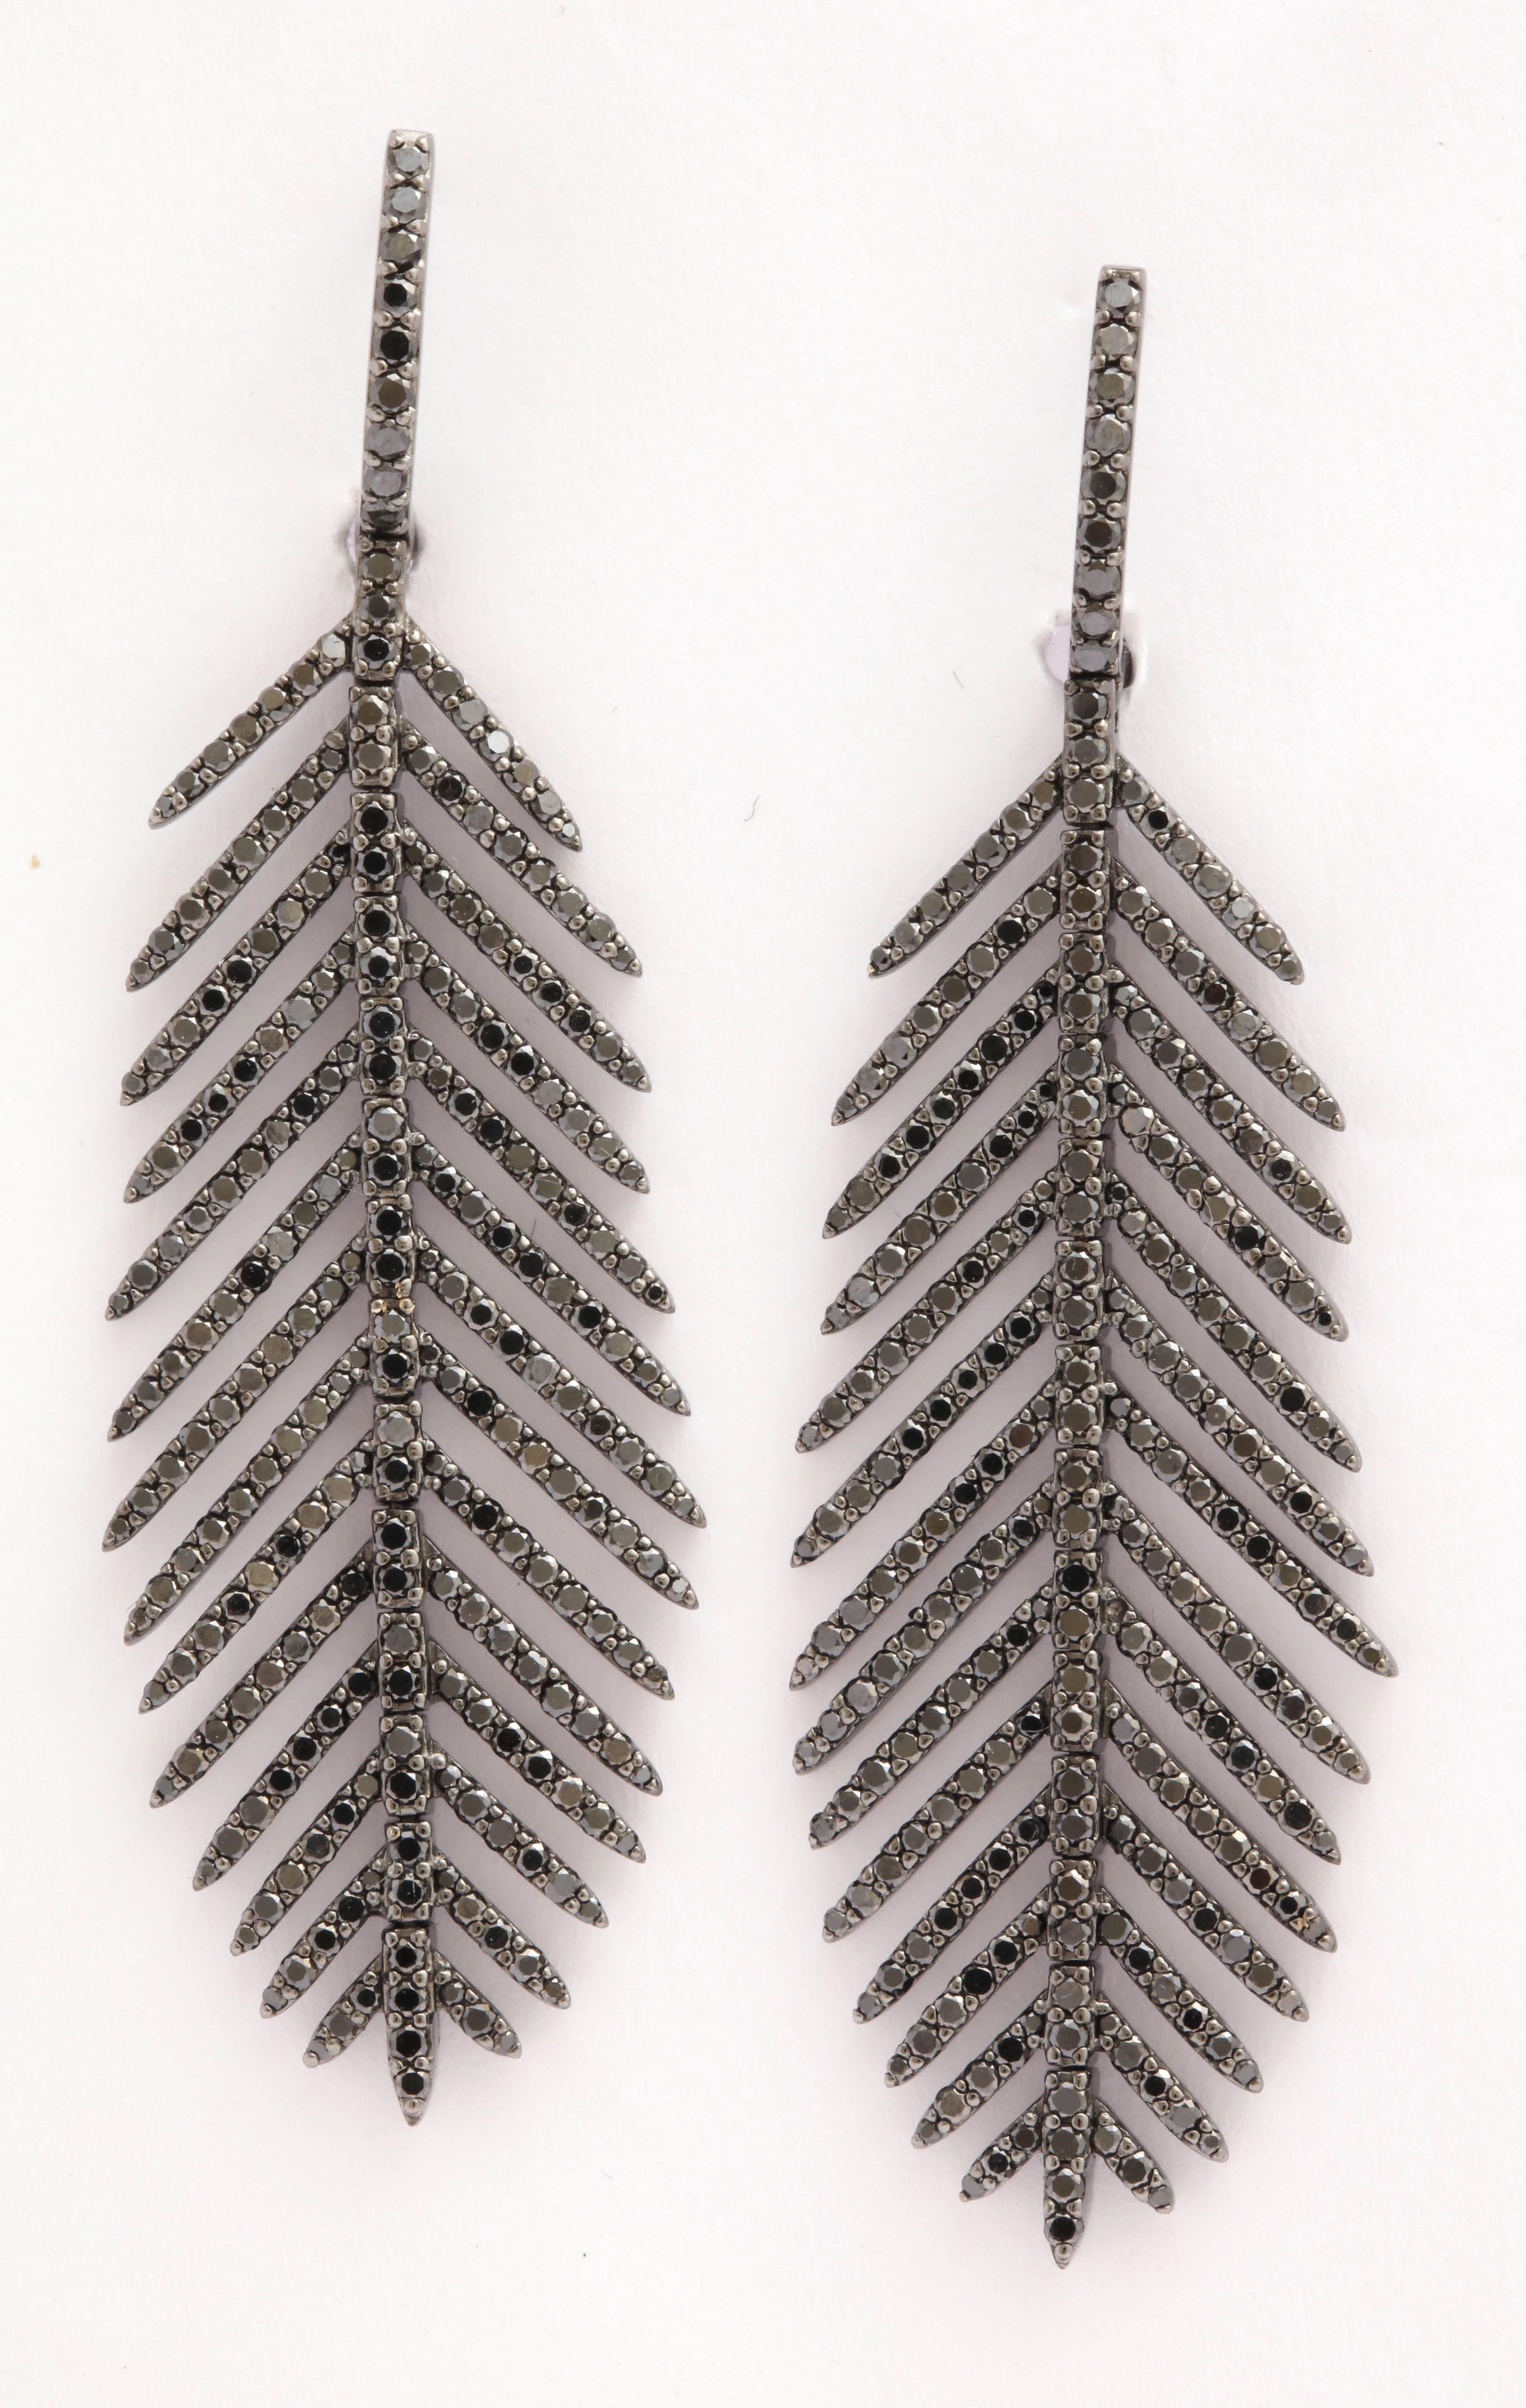 !8kt Black Rhodium plated Articulated Feather Earrings set with black Diamonds.  Apprise 2.5cts total